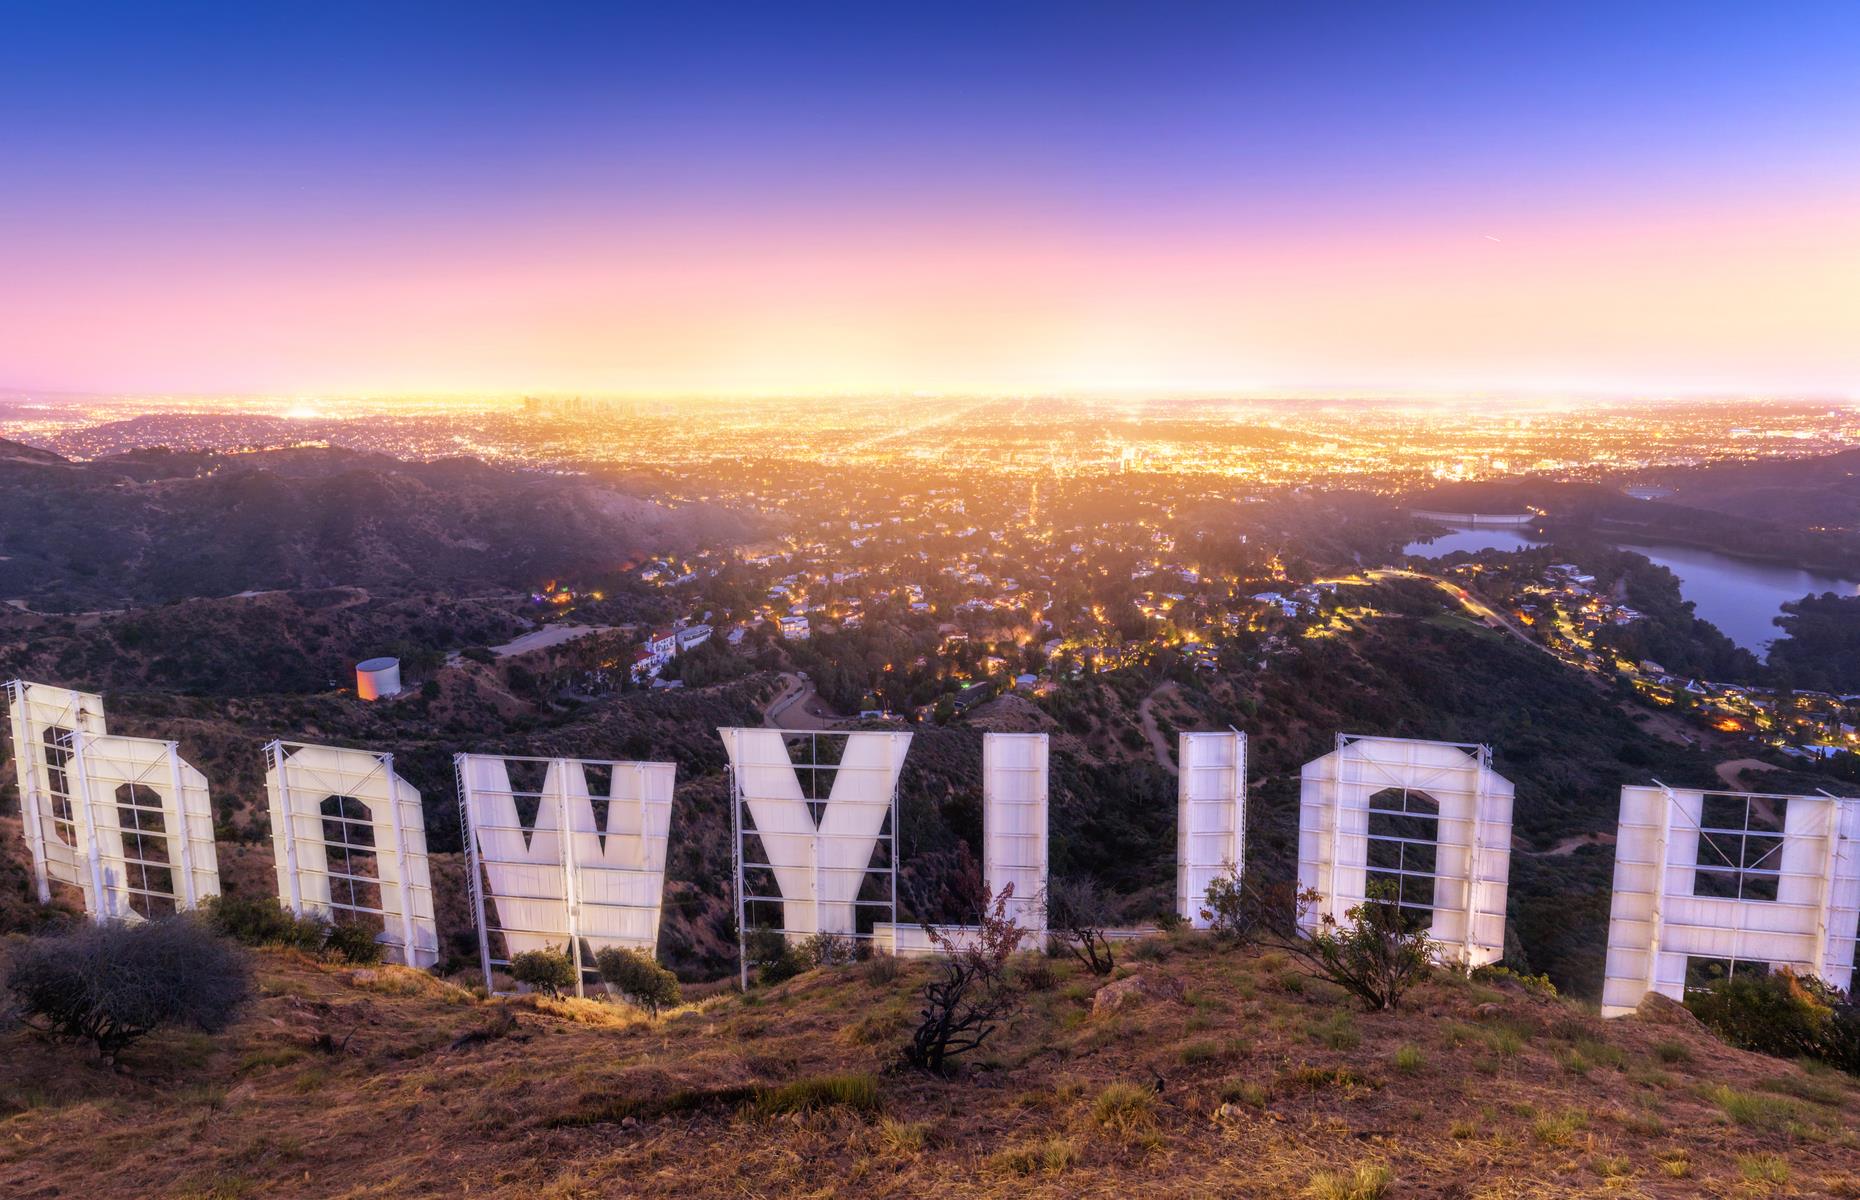 <p>There are various spots for viewing those 45-foot (13.7m) letters, which loom in LA’s Hollywood Hills, but there’s something particularly special about seeing them up close – and standing above the city sprawl. <a href="https://www.laparks.org/griffithpark">Griffith Park</a> has various trails that weave up to the sign. Alternatively, view it amid a wild landscape of mountains and canyons from <a href="http://www.griffithobservatory.org/">Griffith Observatory</a>.</p>  <p><strong><a href="https://www.loveexploring.com/galleries/75307/50-amazing-californian-attractions-not-to-miss?page=1">Here's what not to miss in the Golden State</a></strong></p>